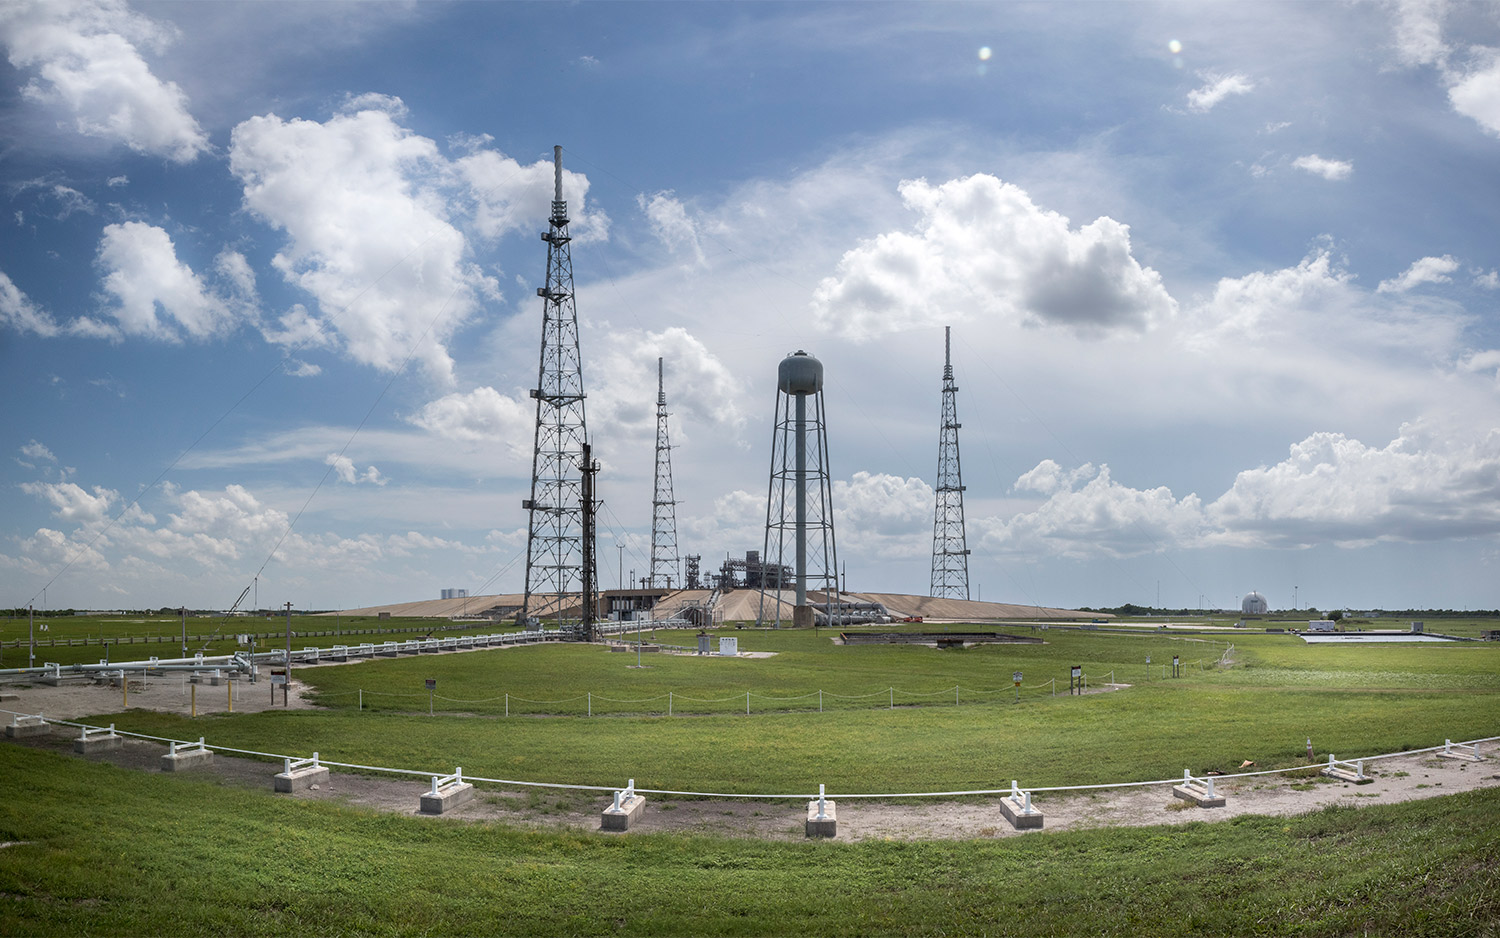 In Photos Nasas Kennedy Space Center Renovates Launch Pad 39b For